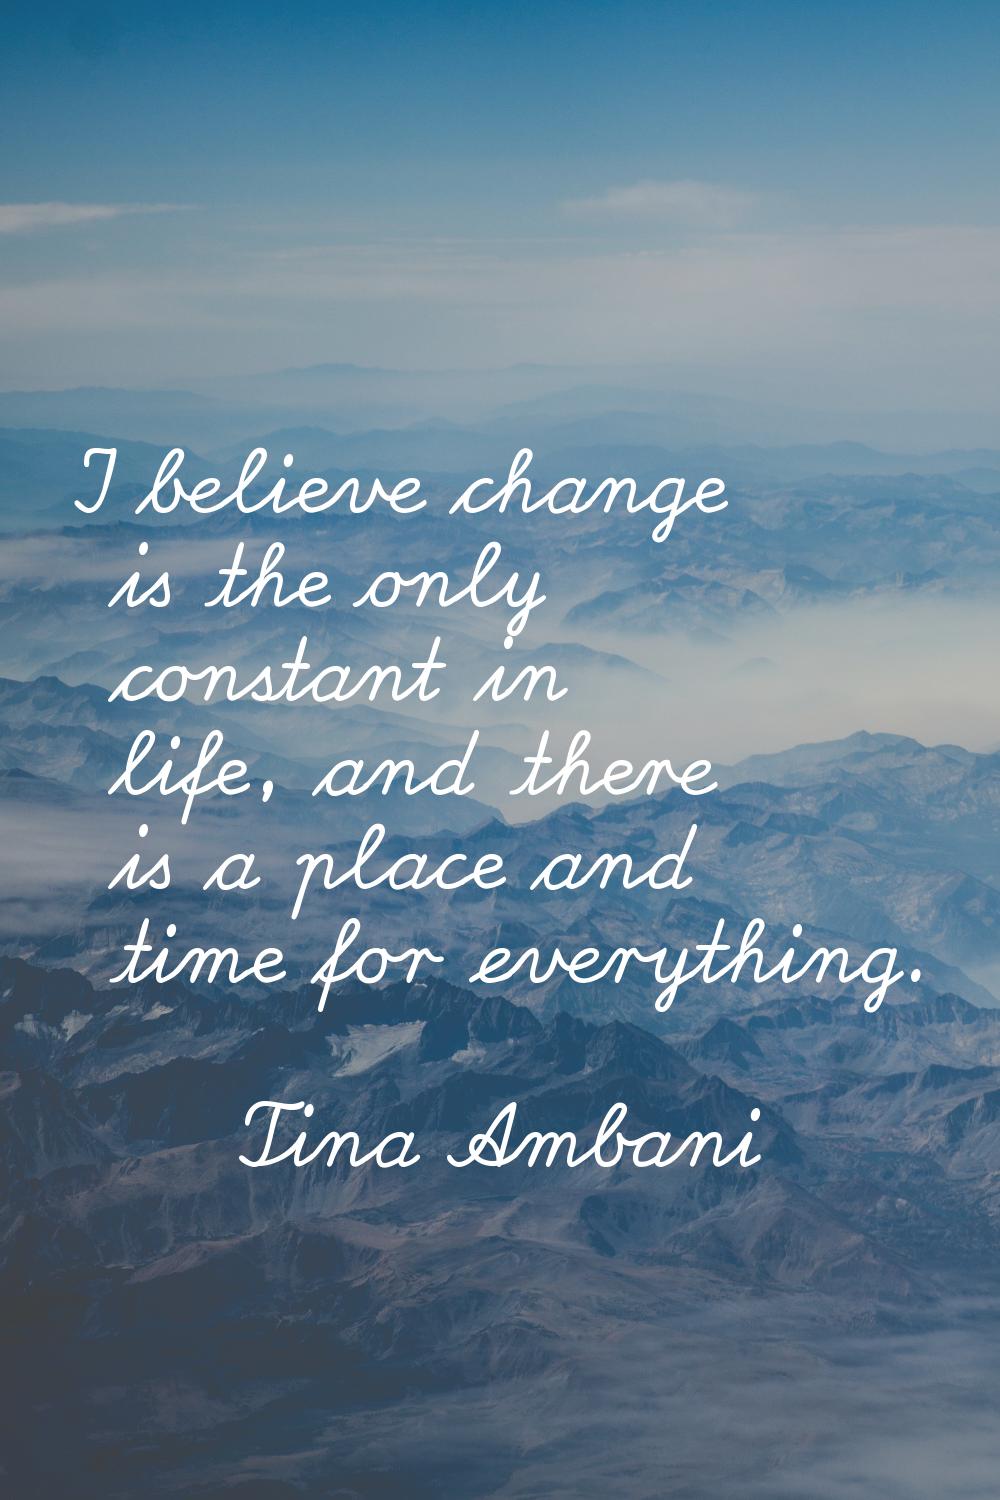 I believe change is the only constant in life, and there is a place and time for everything.